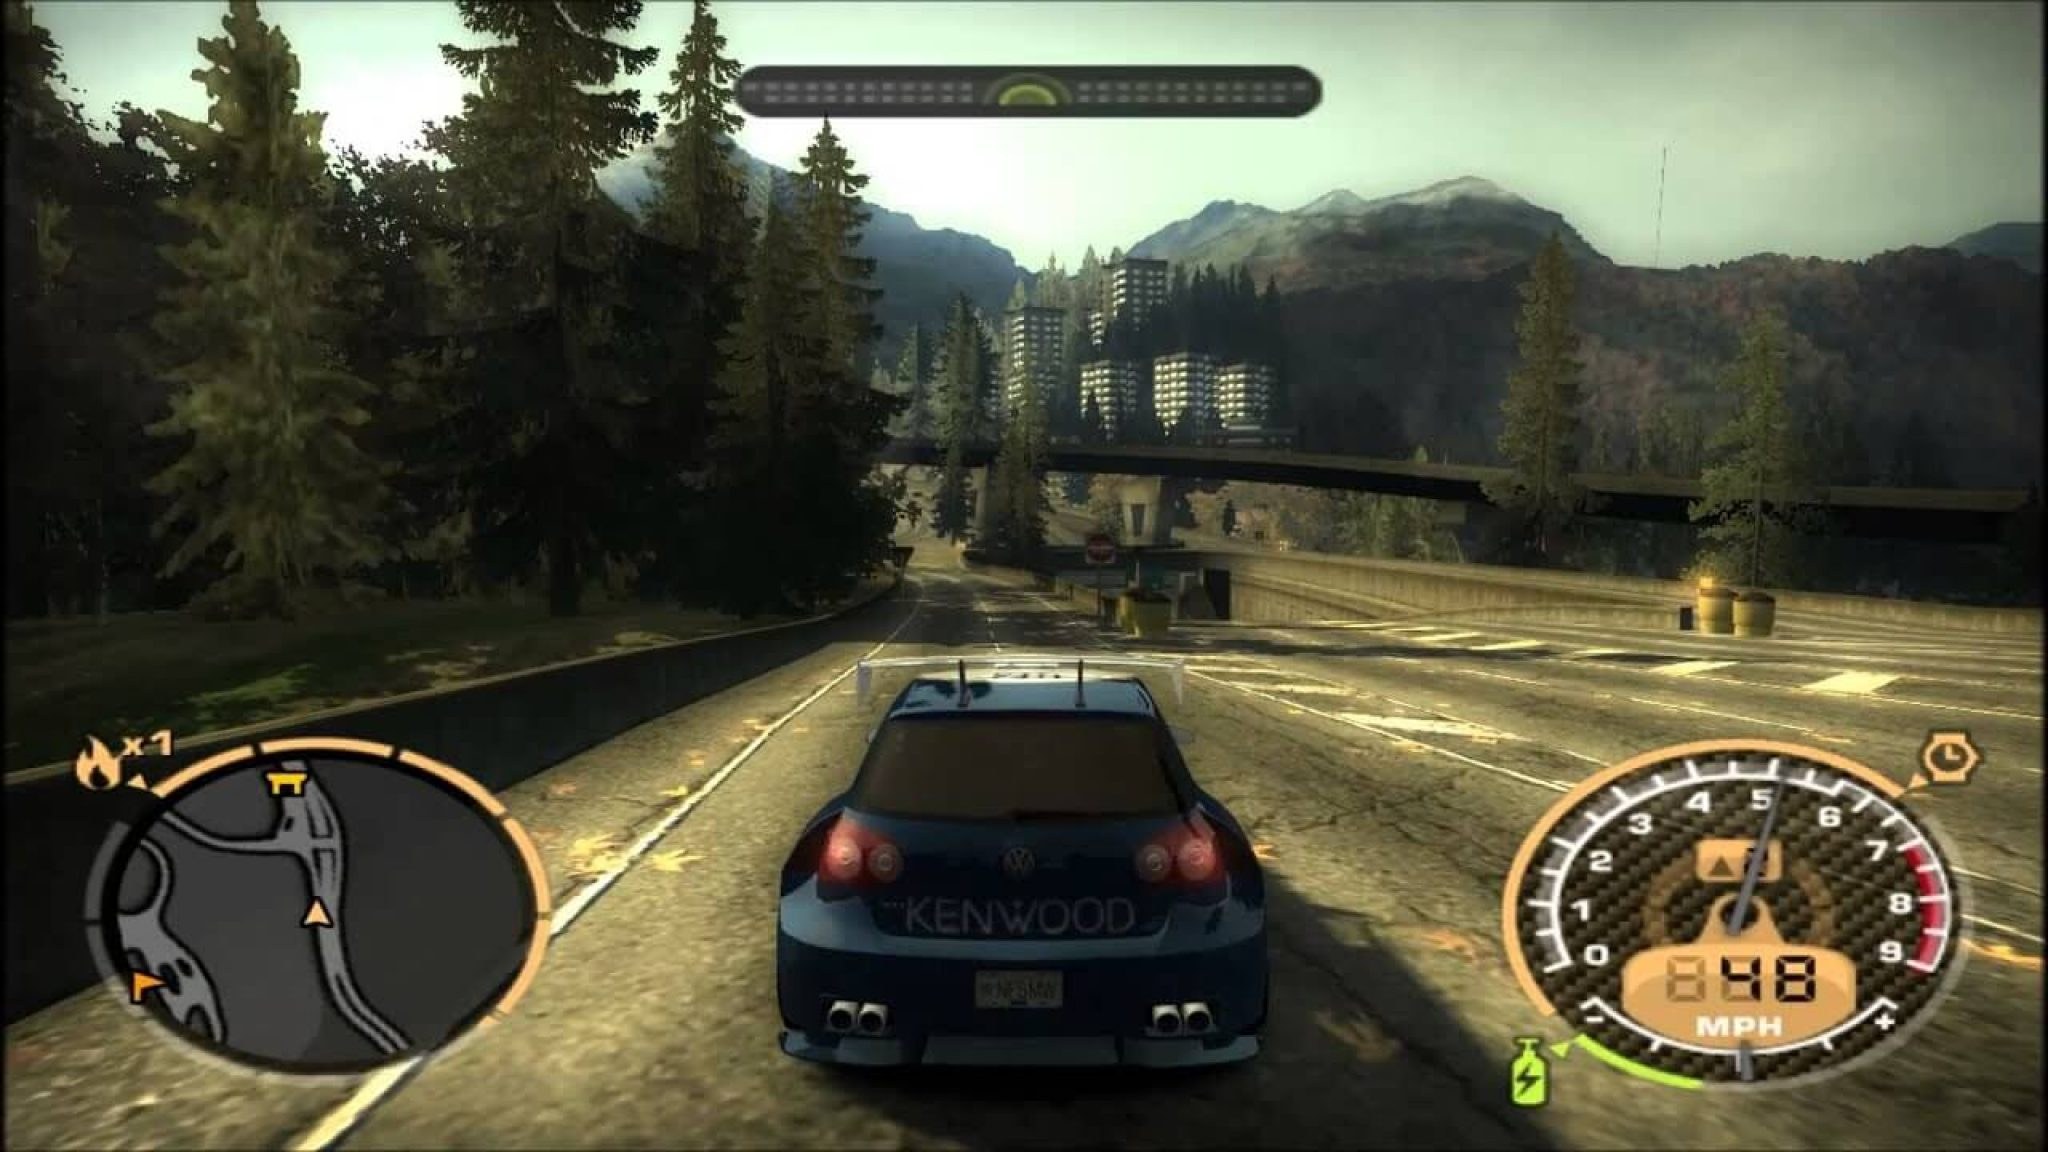 Need for speed most wanted песни. Системные требования NFS most wanted 2005. Игра NFS most wanted 2005. NFS most wanted 2005 геймплей. Need for Speed most wanted ps2 диск.